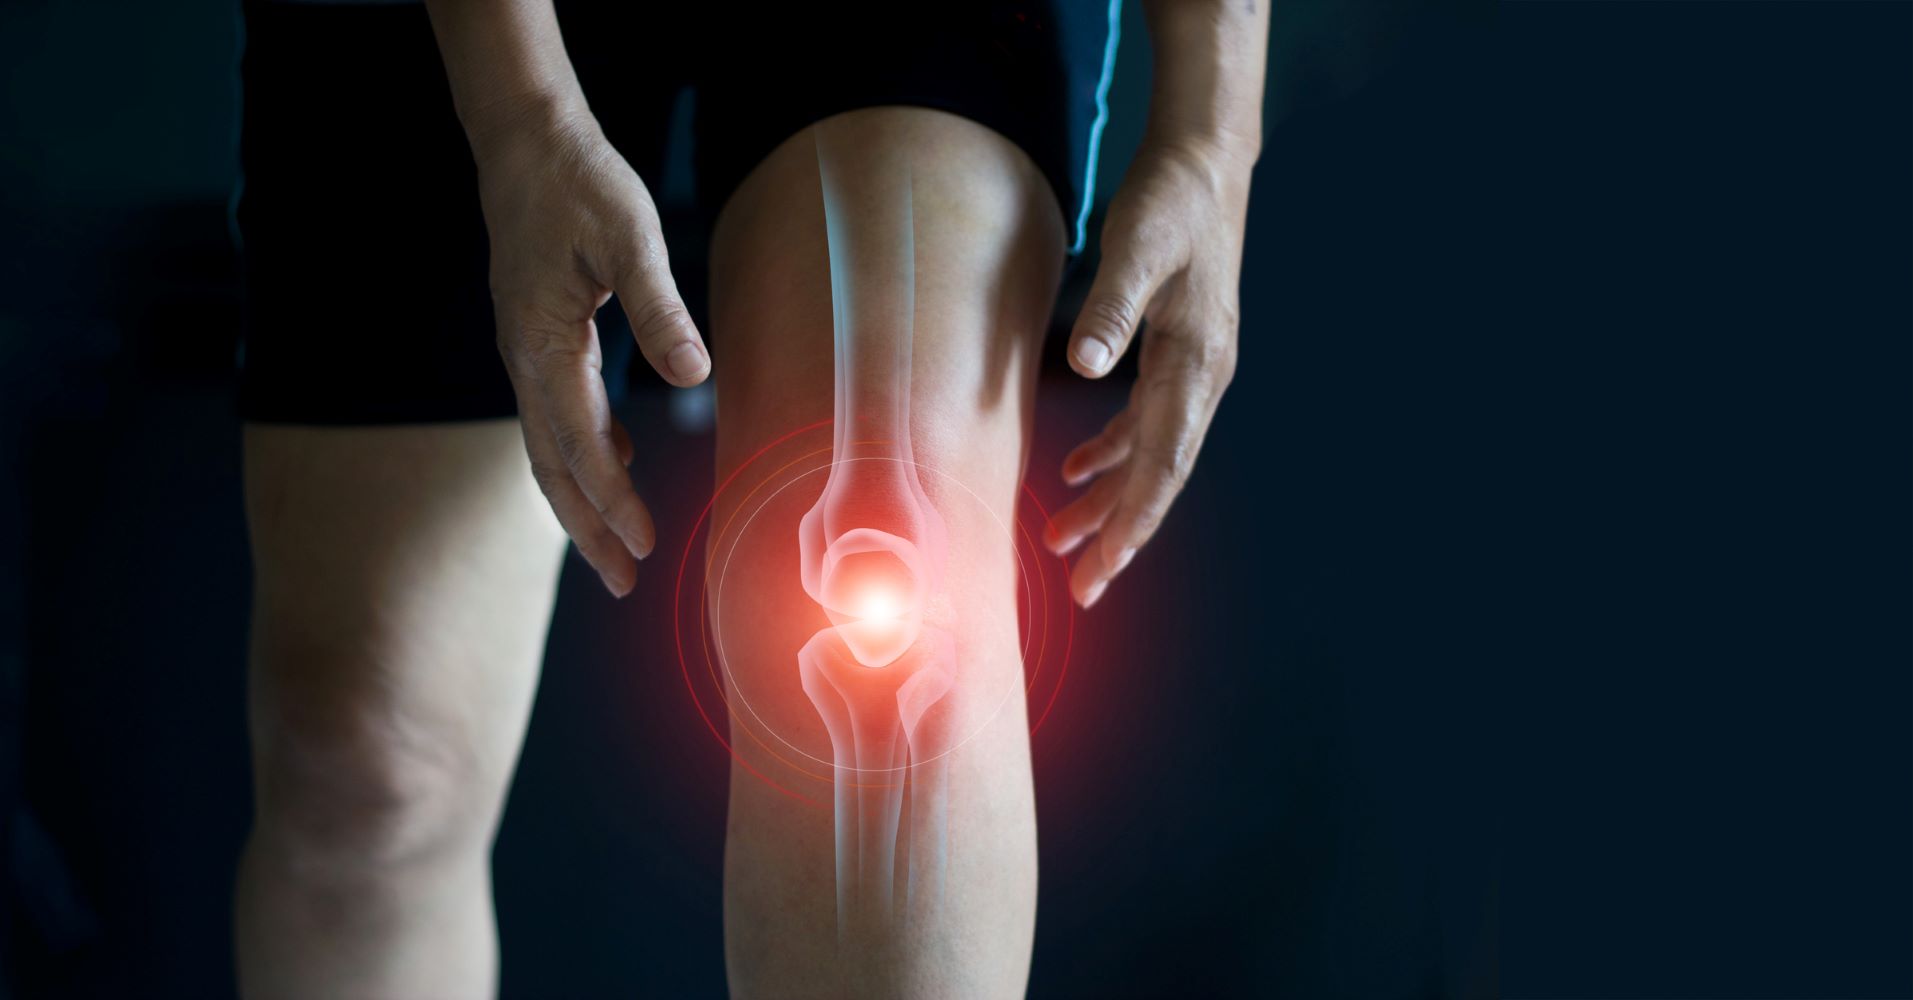 Visuospatial Perception Bias in Patients with Painful Knee Osteoarthritis